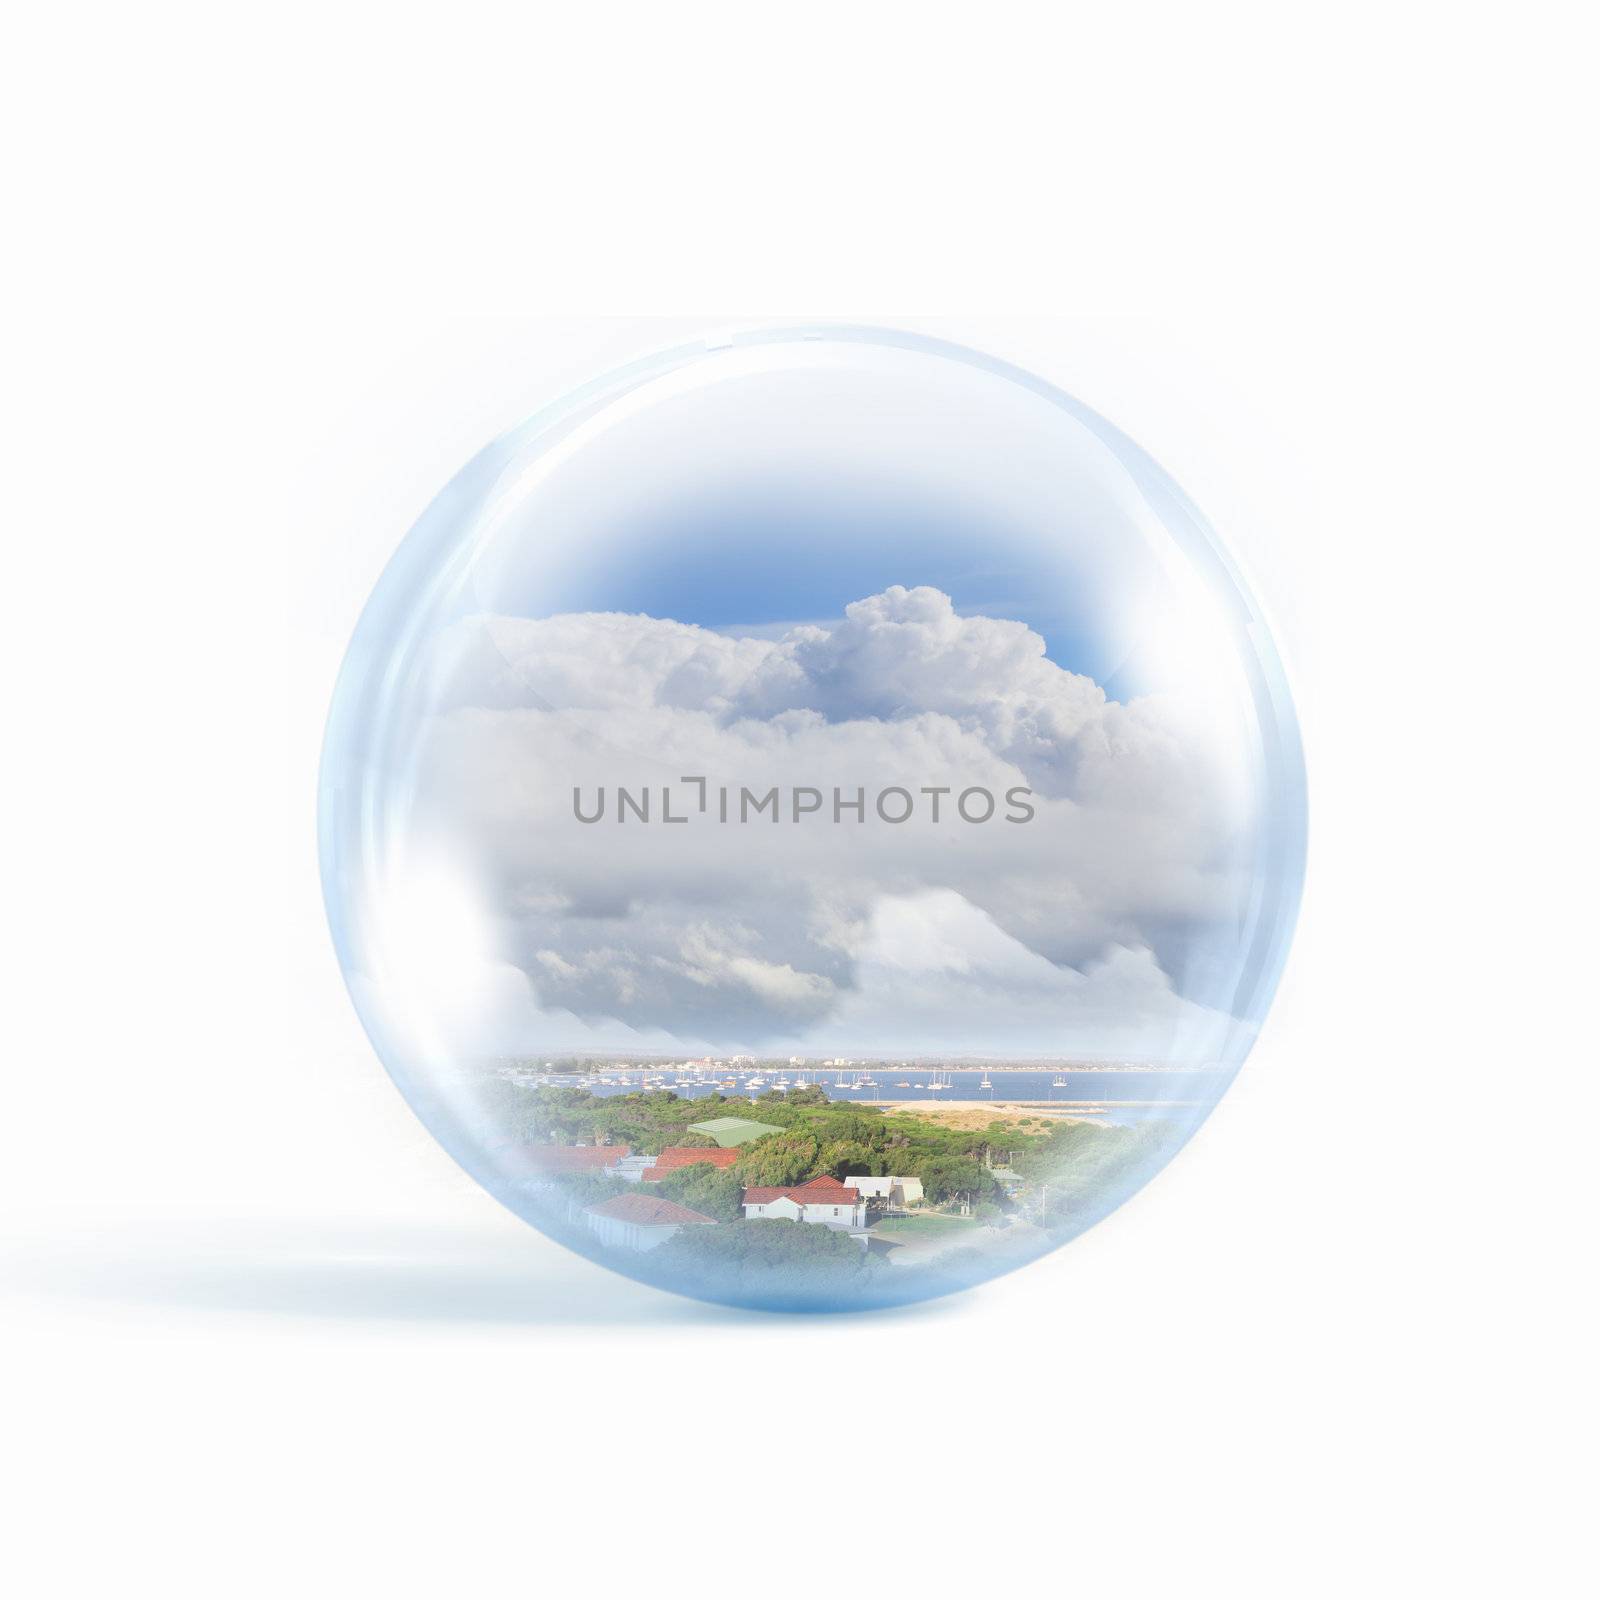 Residential building inside a transparent glass sphere